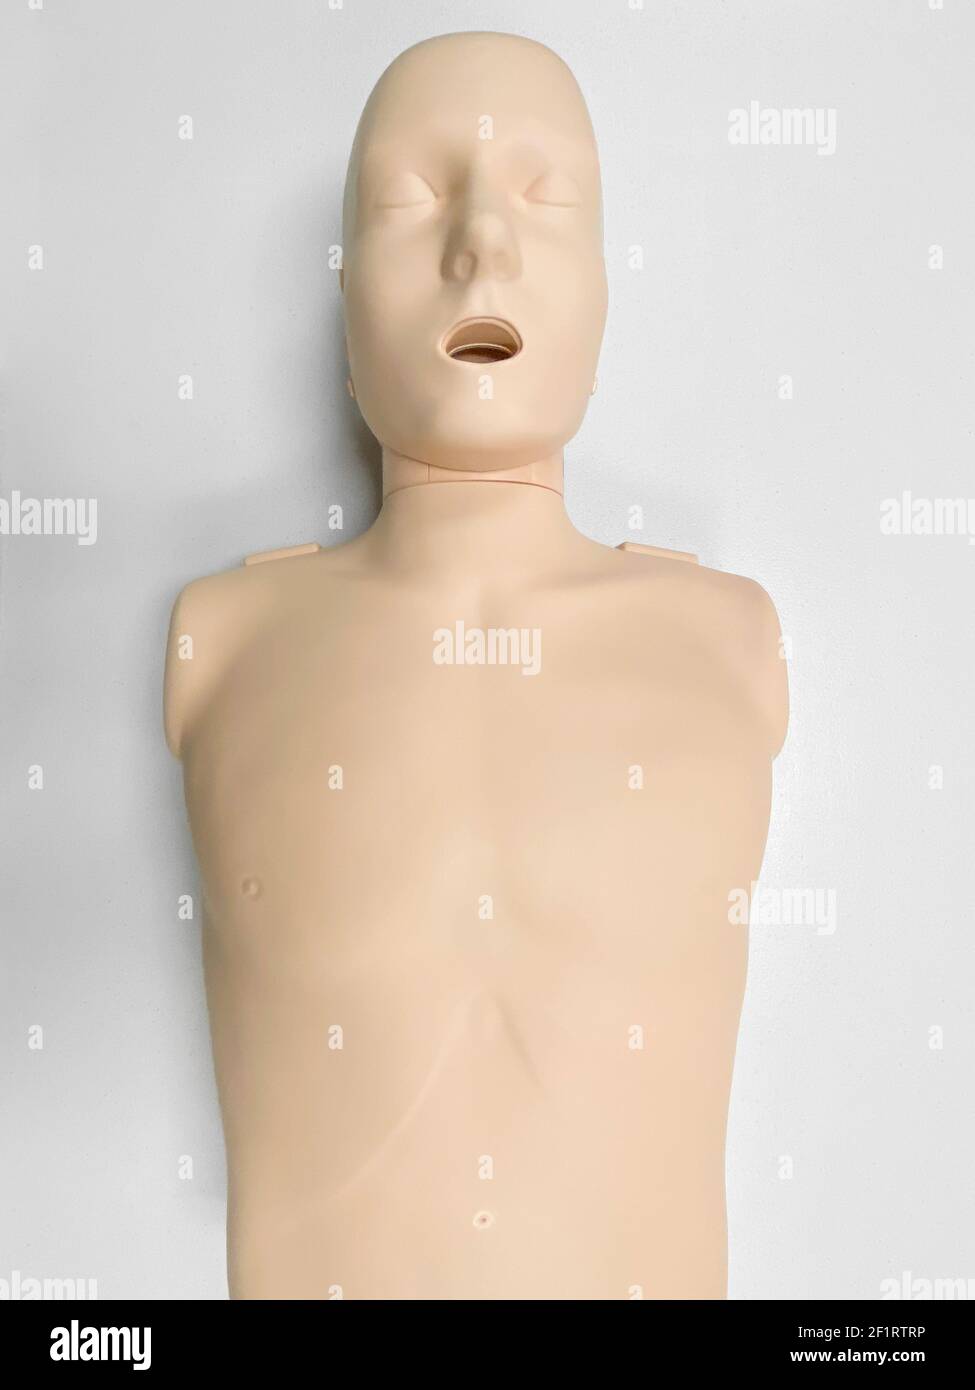 CPR dummy on white background for first aid and cardiopulmonary resuscitation training Stock Photo